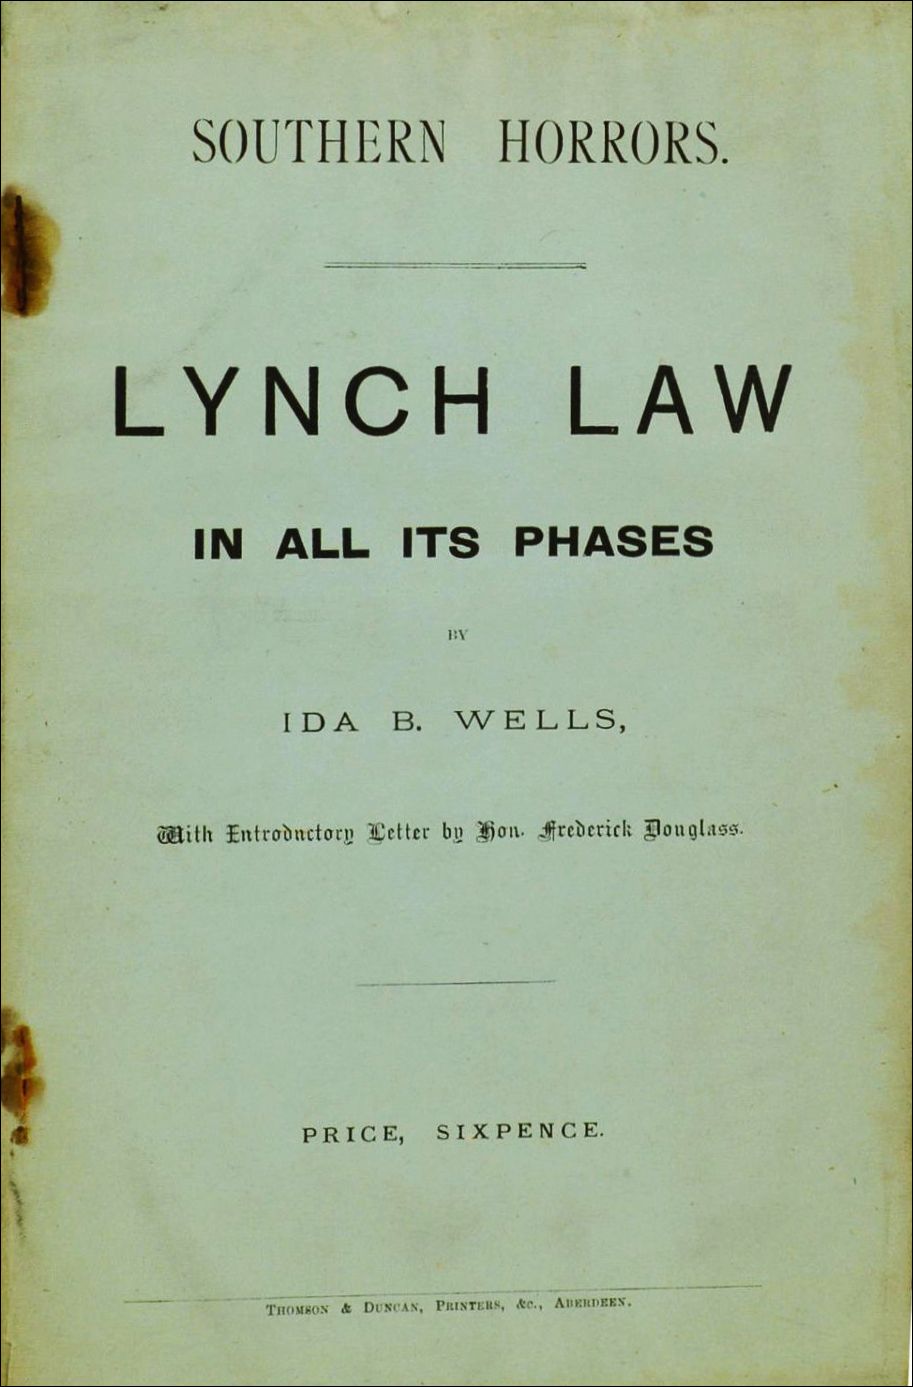 Wells was forced to leave Memphis in 1892 when she revealed the real reason Black men had been lynched: white fears of losing revenue to Black-owned businesses. 